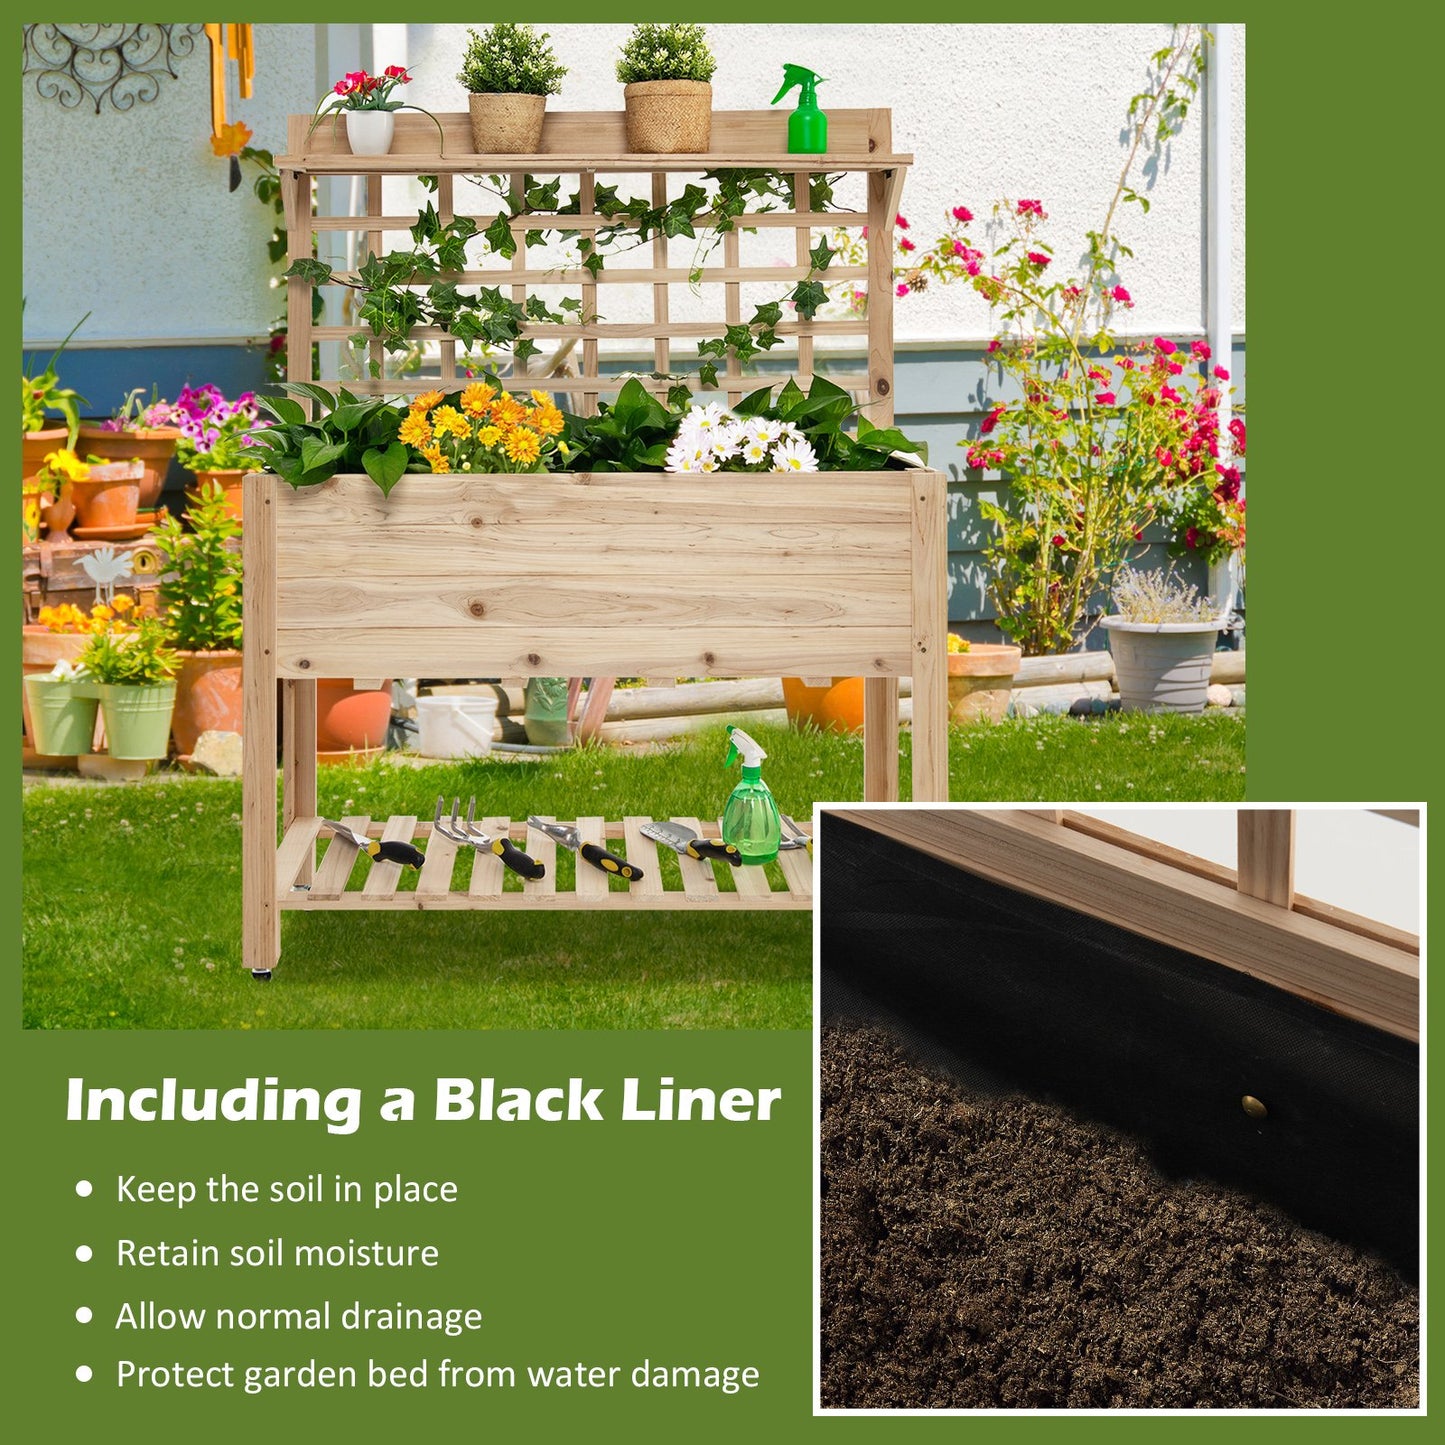 Wooden Raised Garden Bed with Wheels Trellis and Storage Shelf, Natural - Gallery Canada